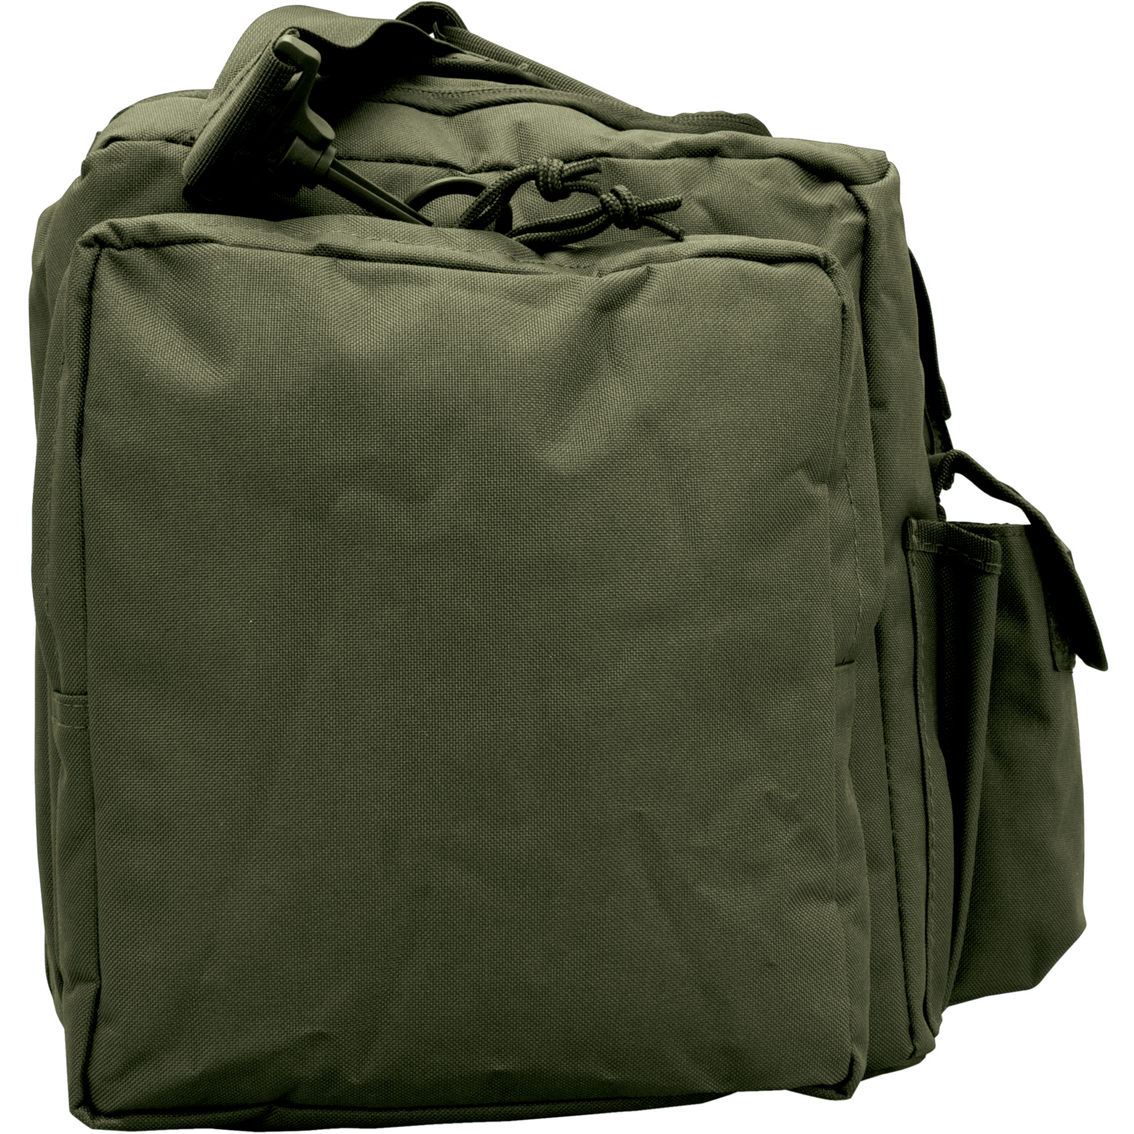 Red Rock Outdoor Gear Operations Duffel Bag - Image 5 of 6